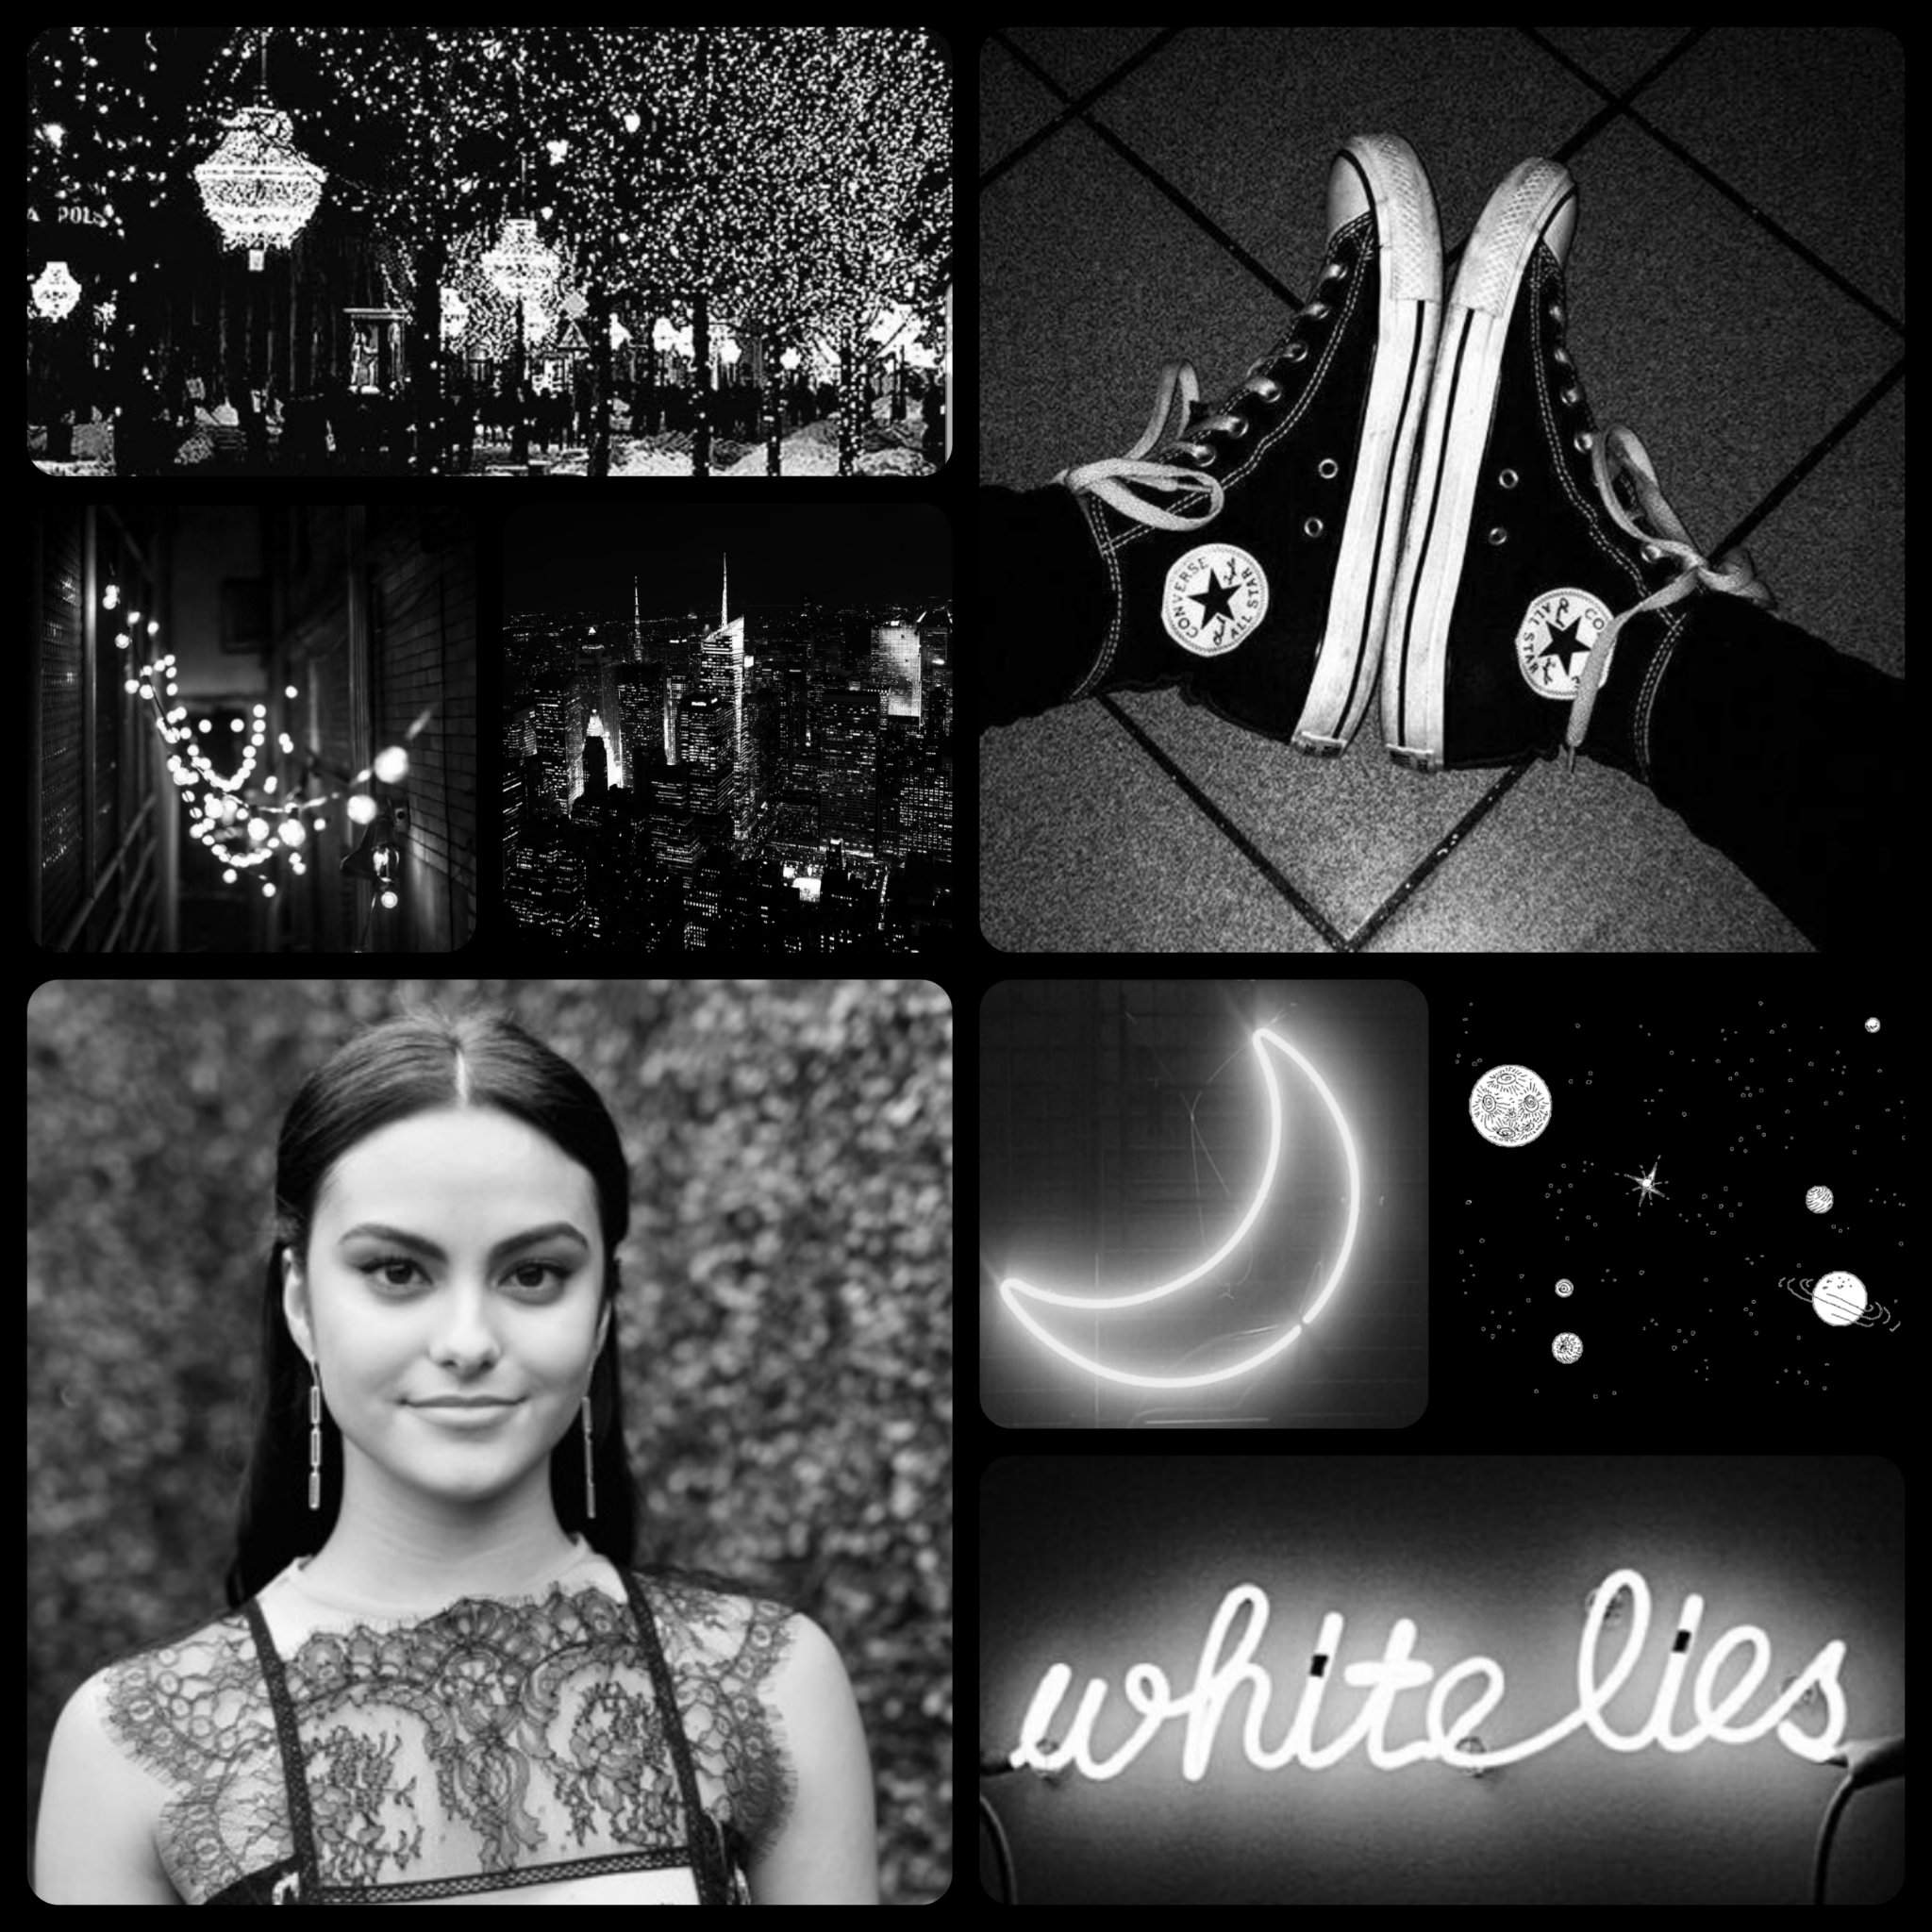 A black and white aesthetic for Veronica